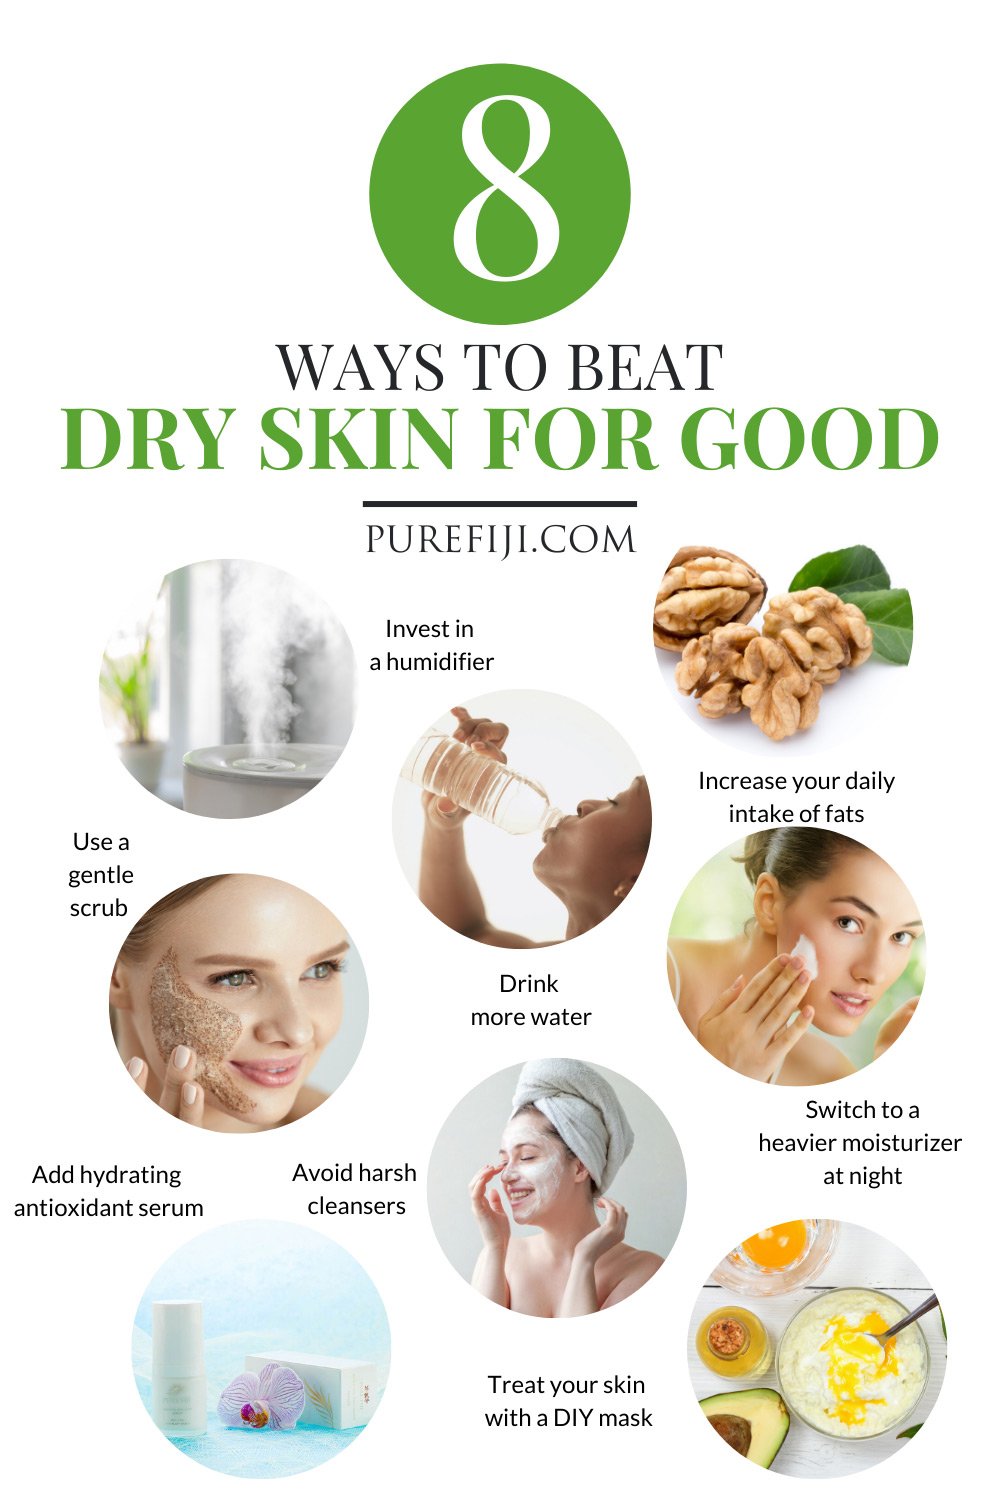 A body care routine for healthy skin – mCaffeine